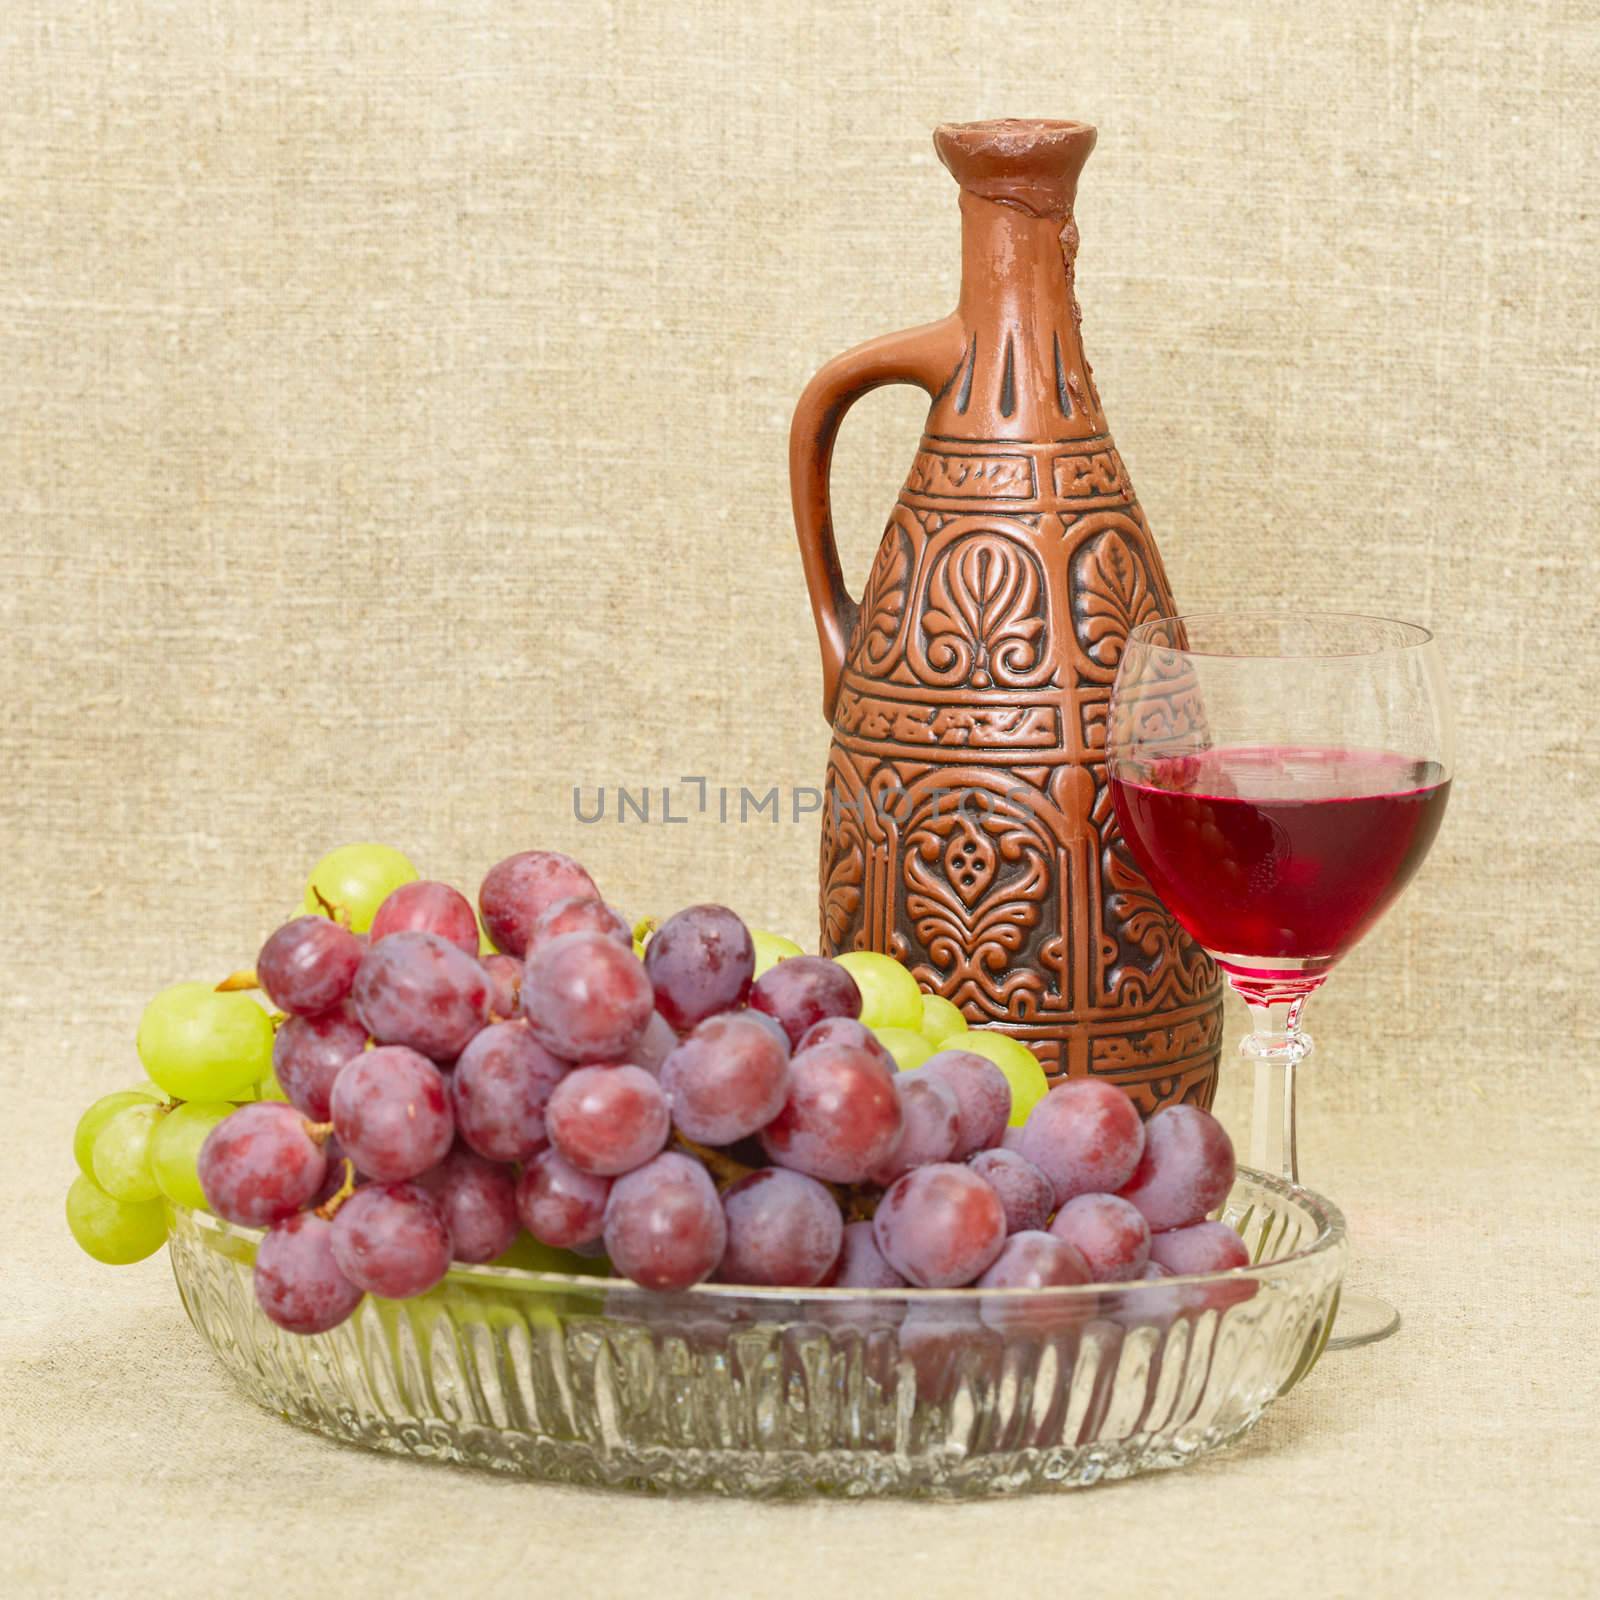 Still life with ceramic bottle, grape and glass by pzaxe